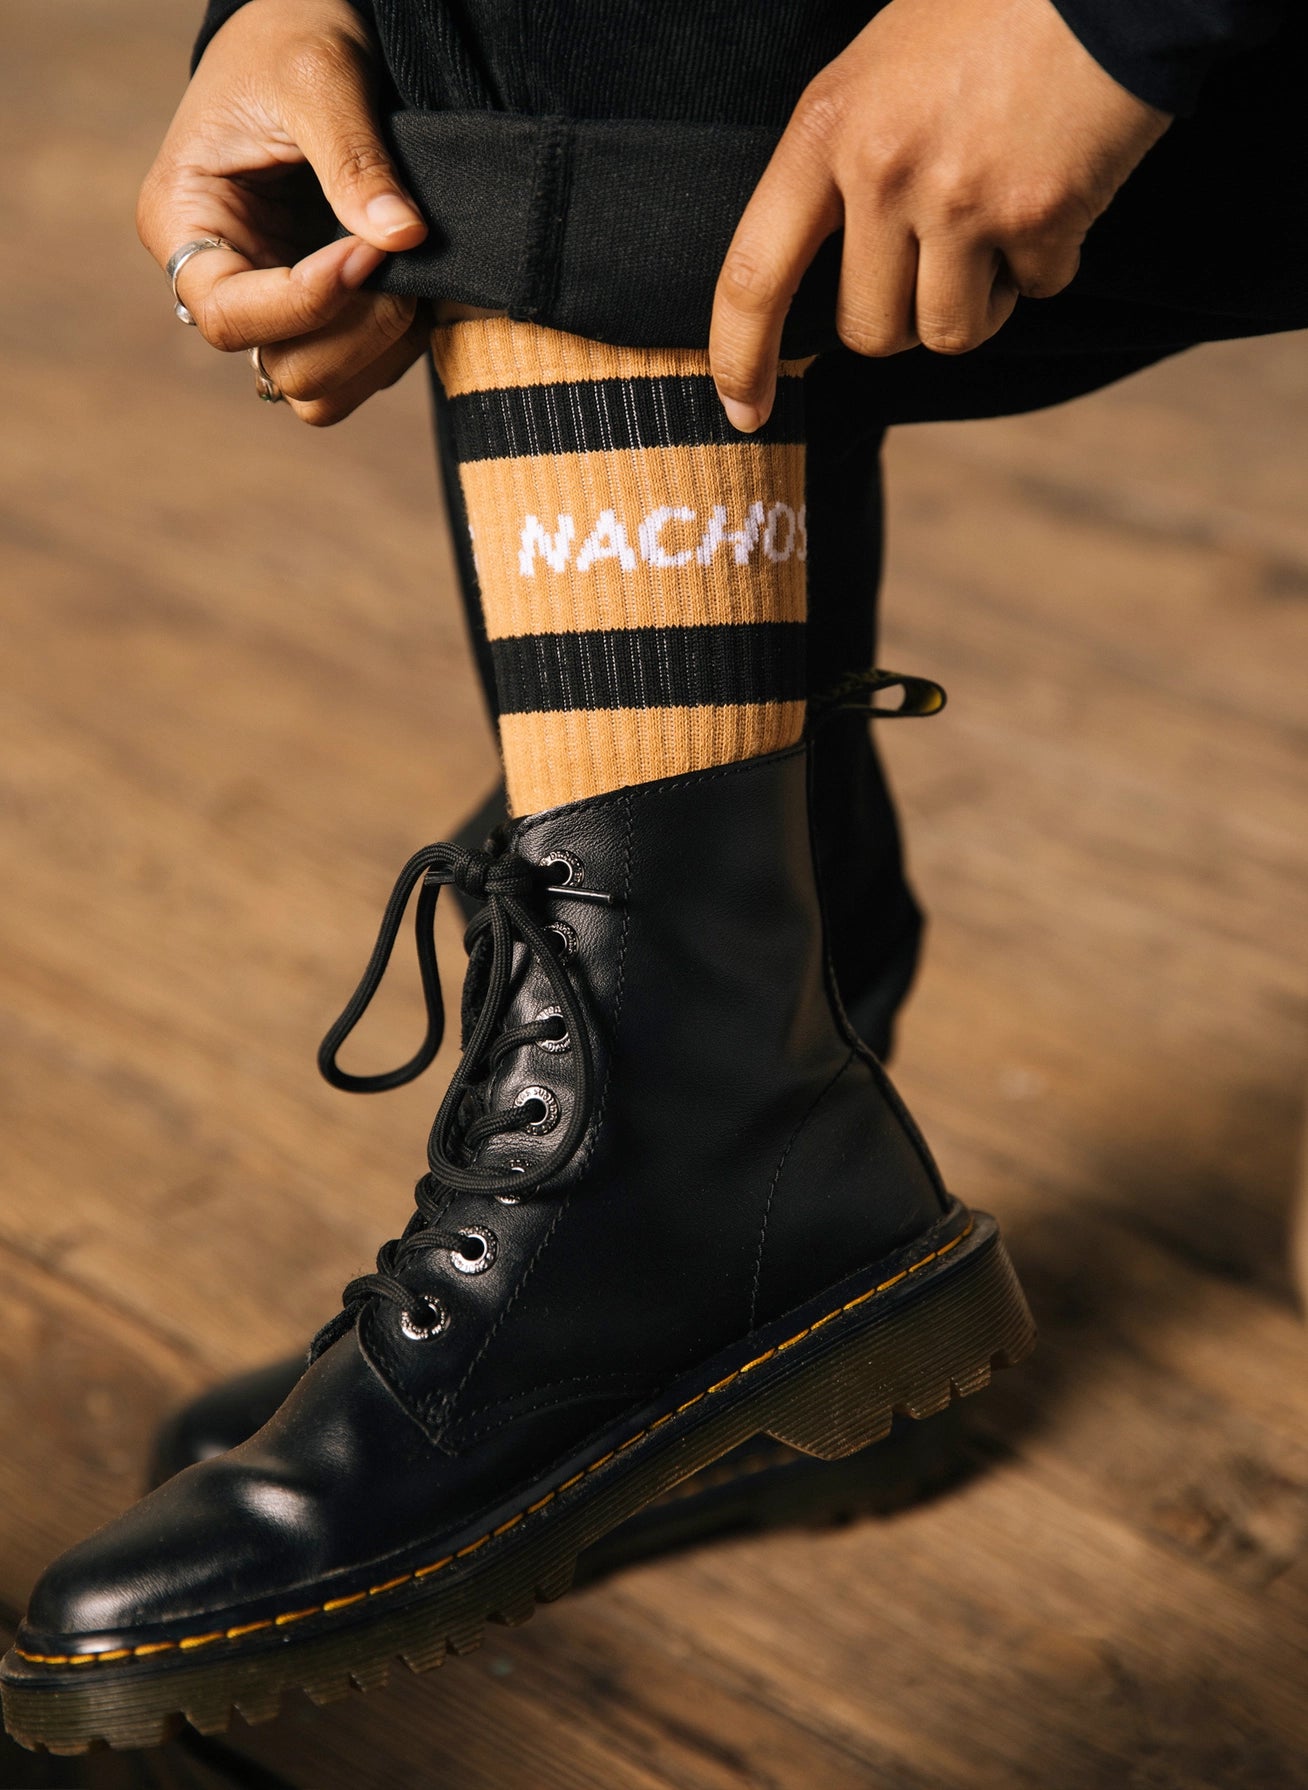 Nachos socks. Model is wearing Doc Martin Boots and high black pants to show off the sock's stripes and words.